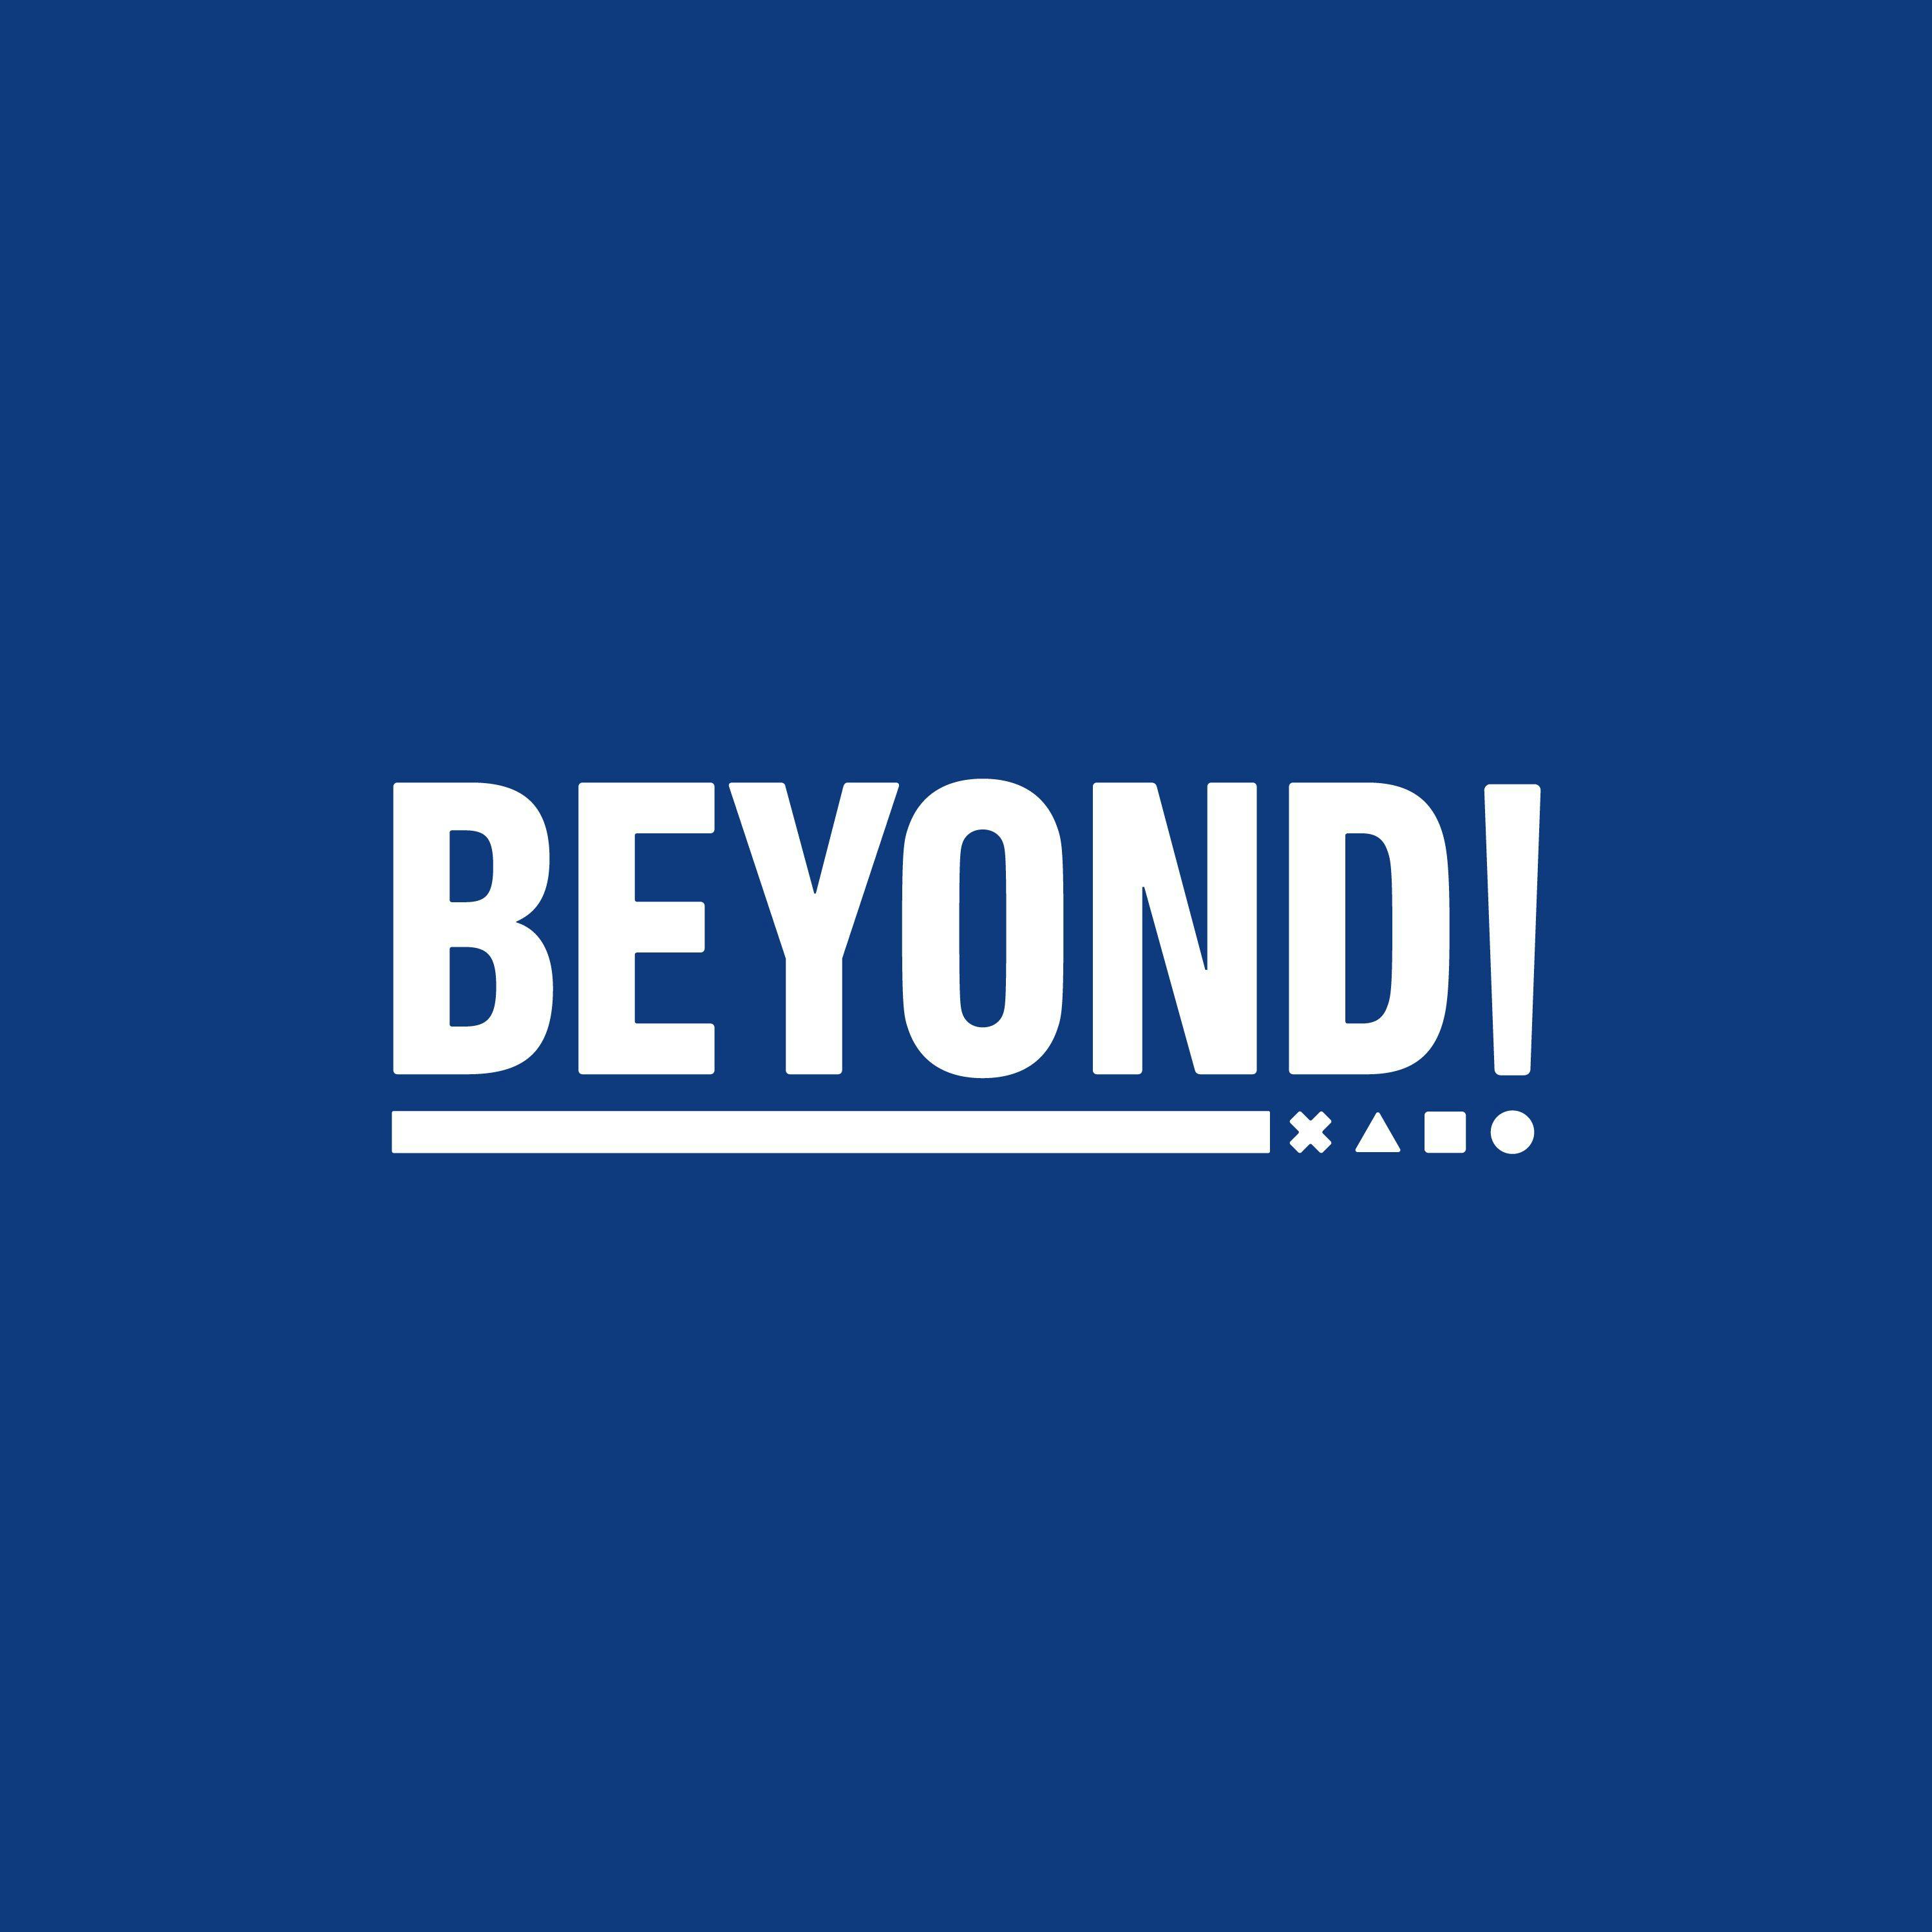 PS5 Games 'Soon' - What Is Sony's Next-Gen Lineup? - Beyond Episode 646